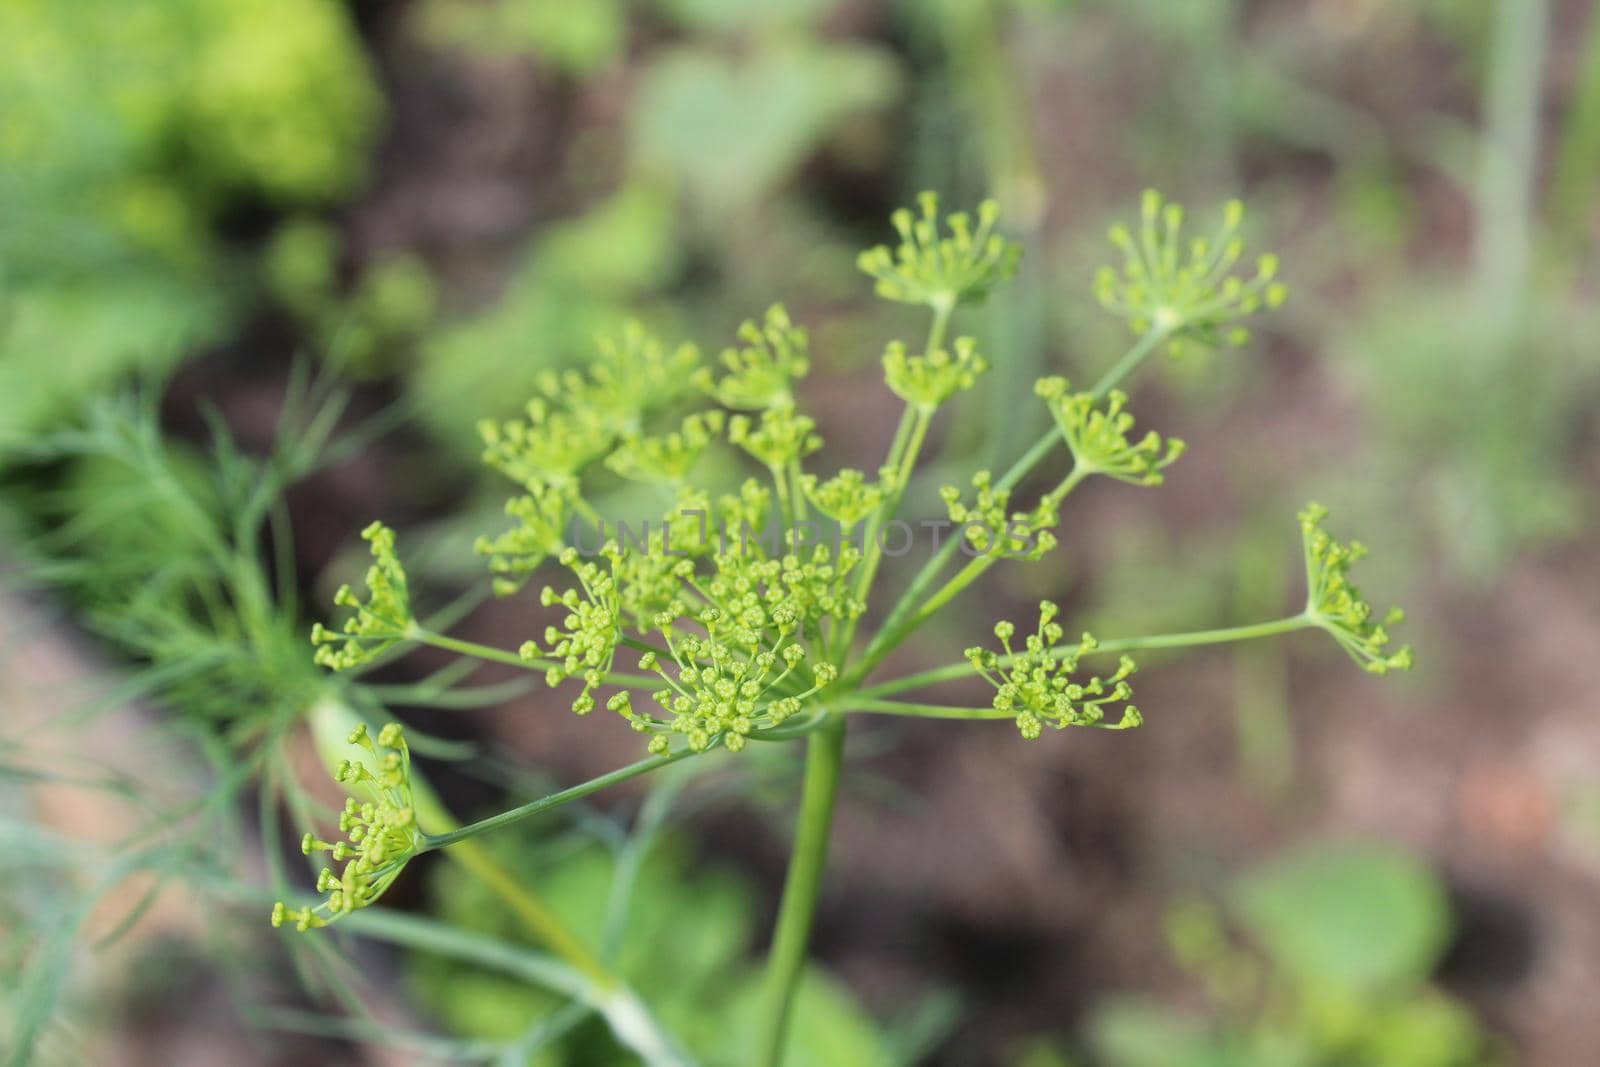 dill flowers close-up. The flowering of greenery. summer. Growing the eeleme of vitamins vegetables by Shoba